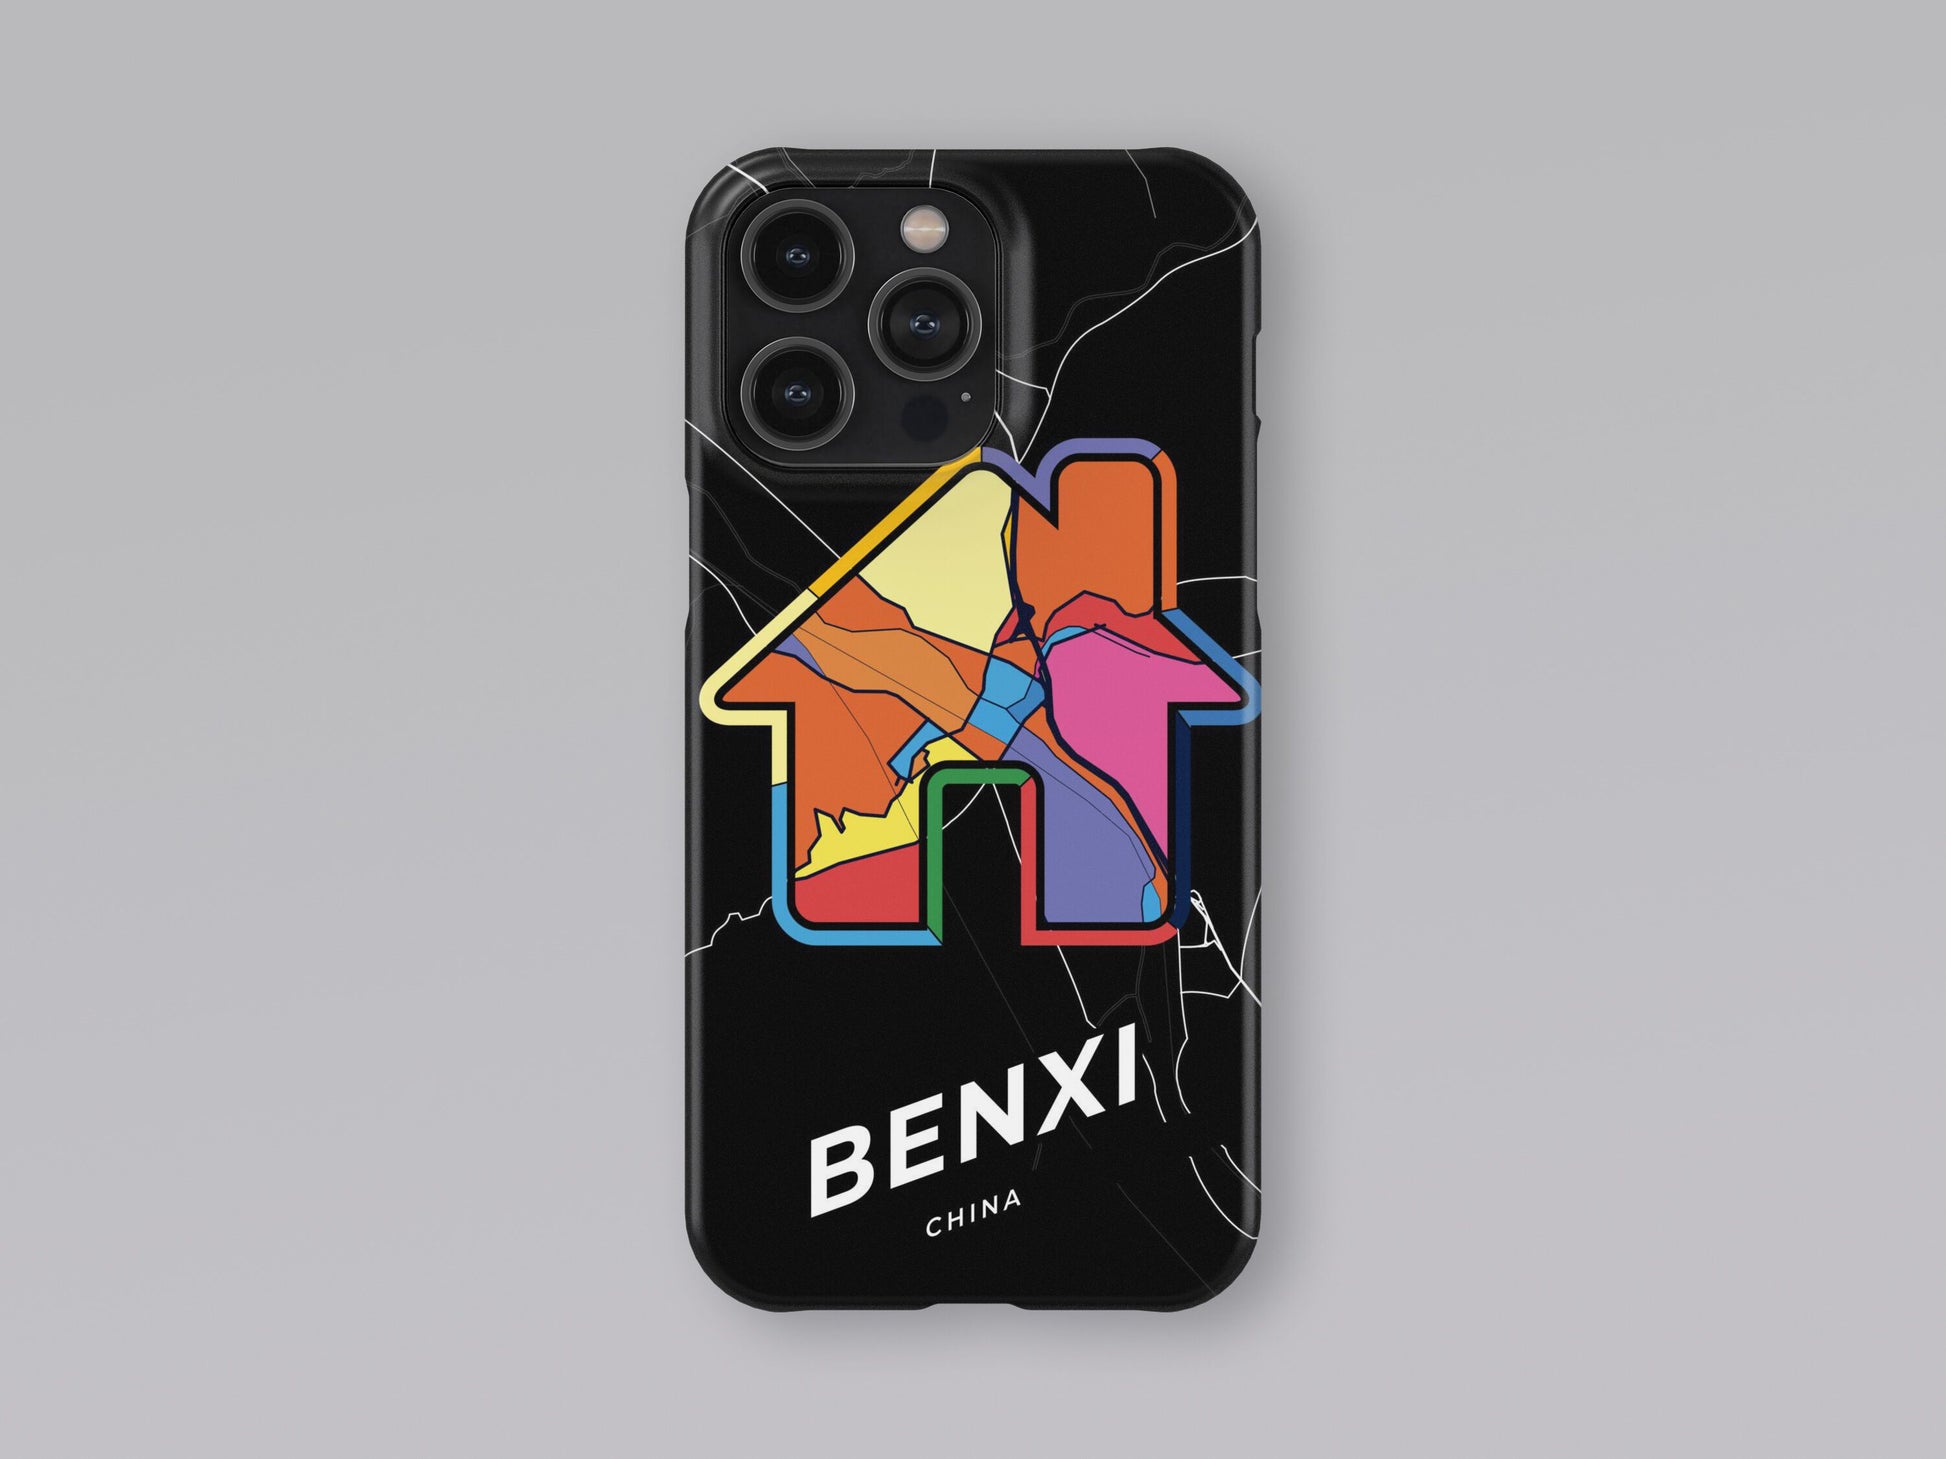 Benxi China slim phone case with colorful icon. Birthday, wedding or housewarming gift. Couple match cases. 3